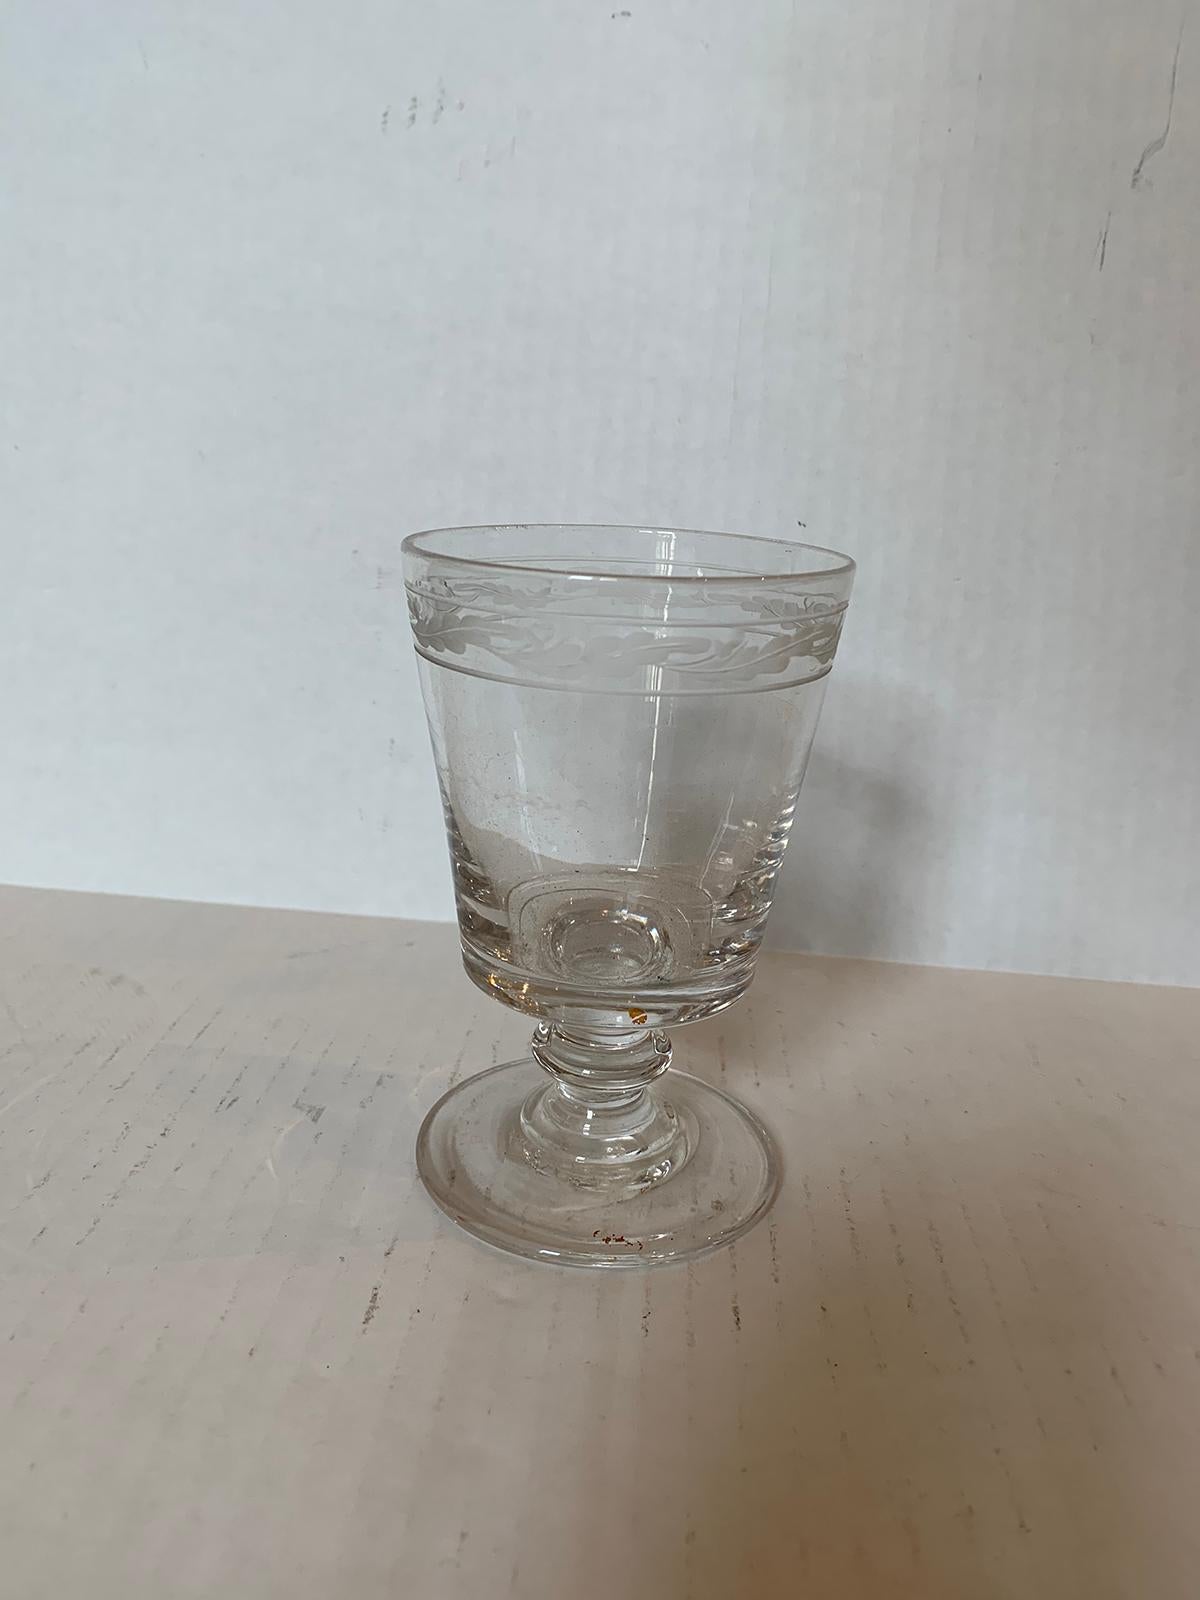 19th century etched glass goblet or chalice with leaf motif.